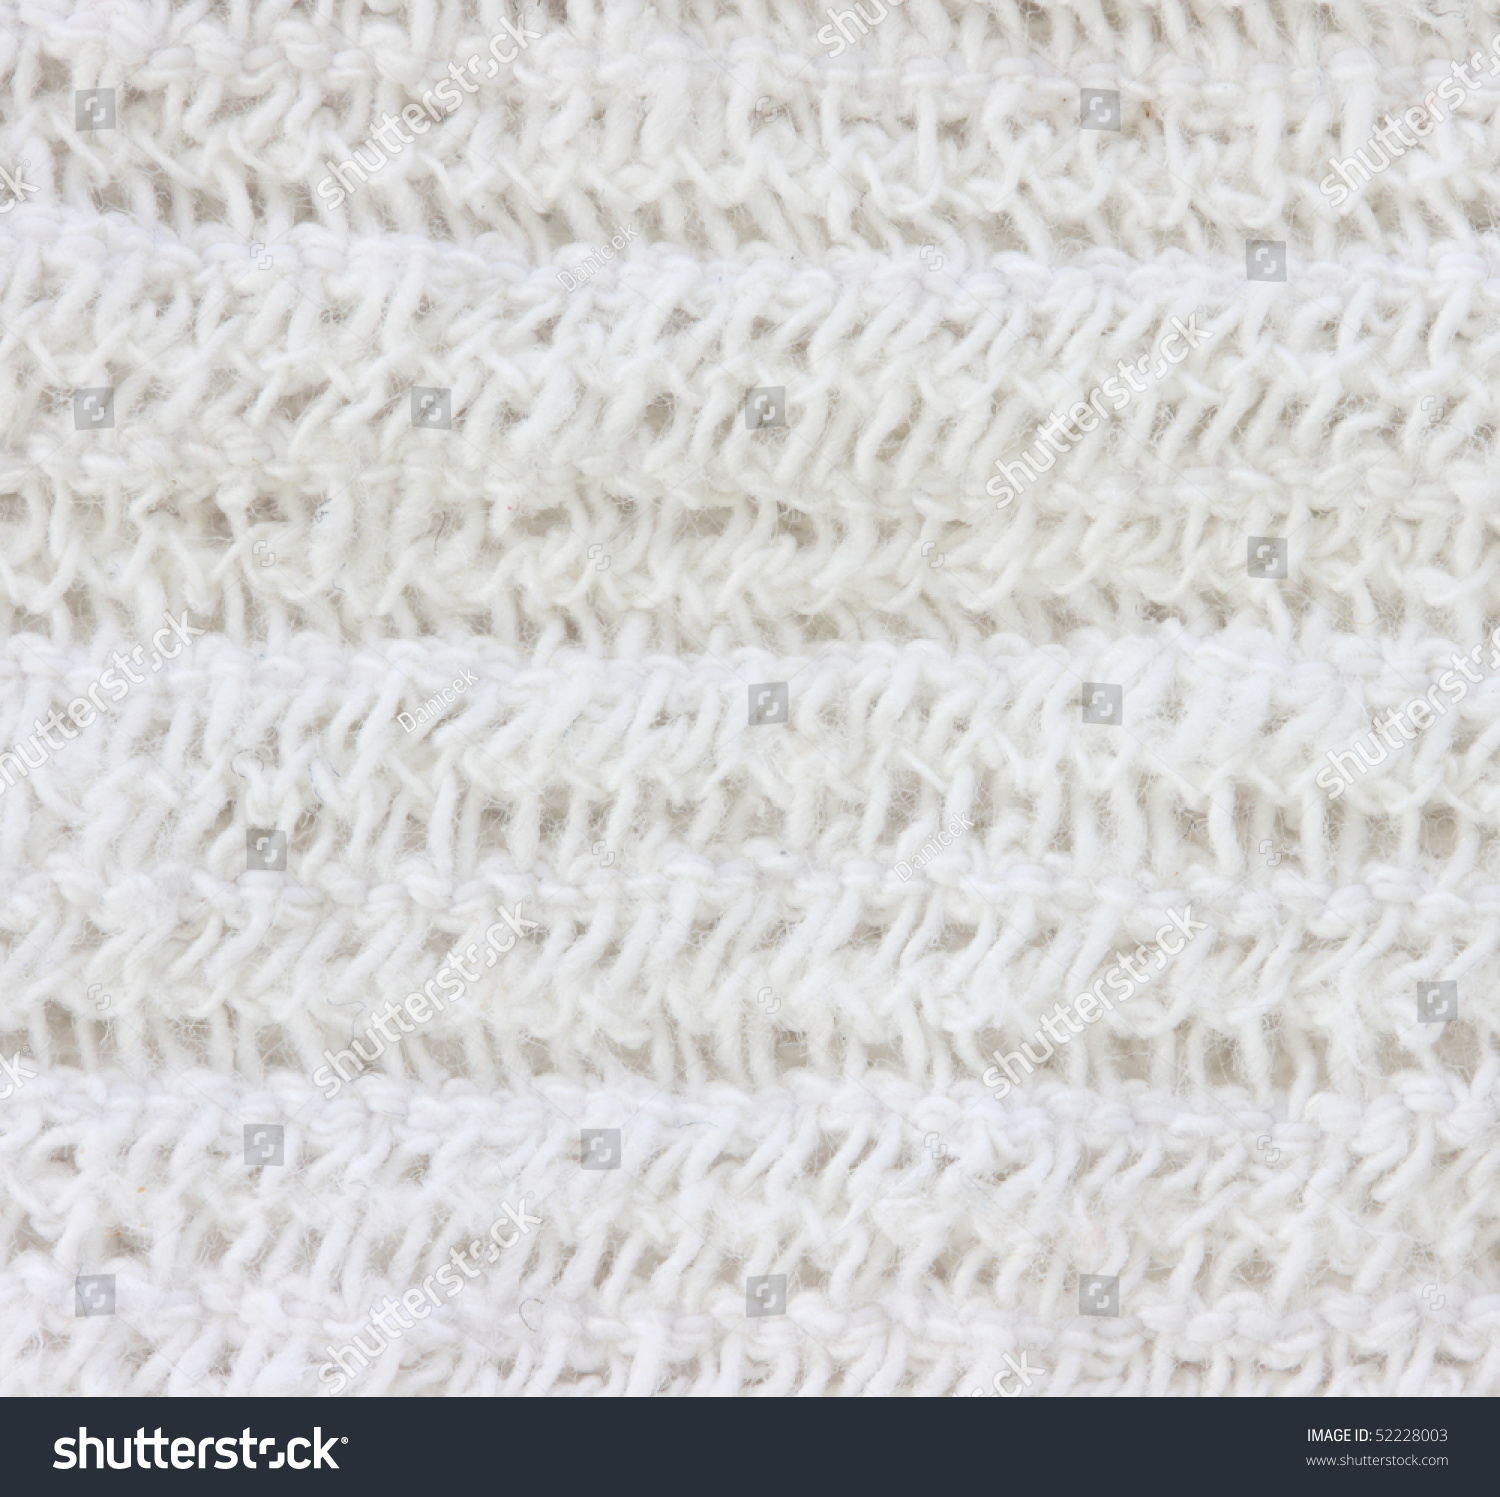 Close Up View Of White Knit Fabric Texture - Gauze / Mull Detail Stock ...